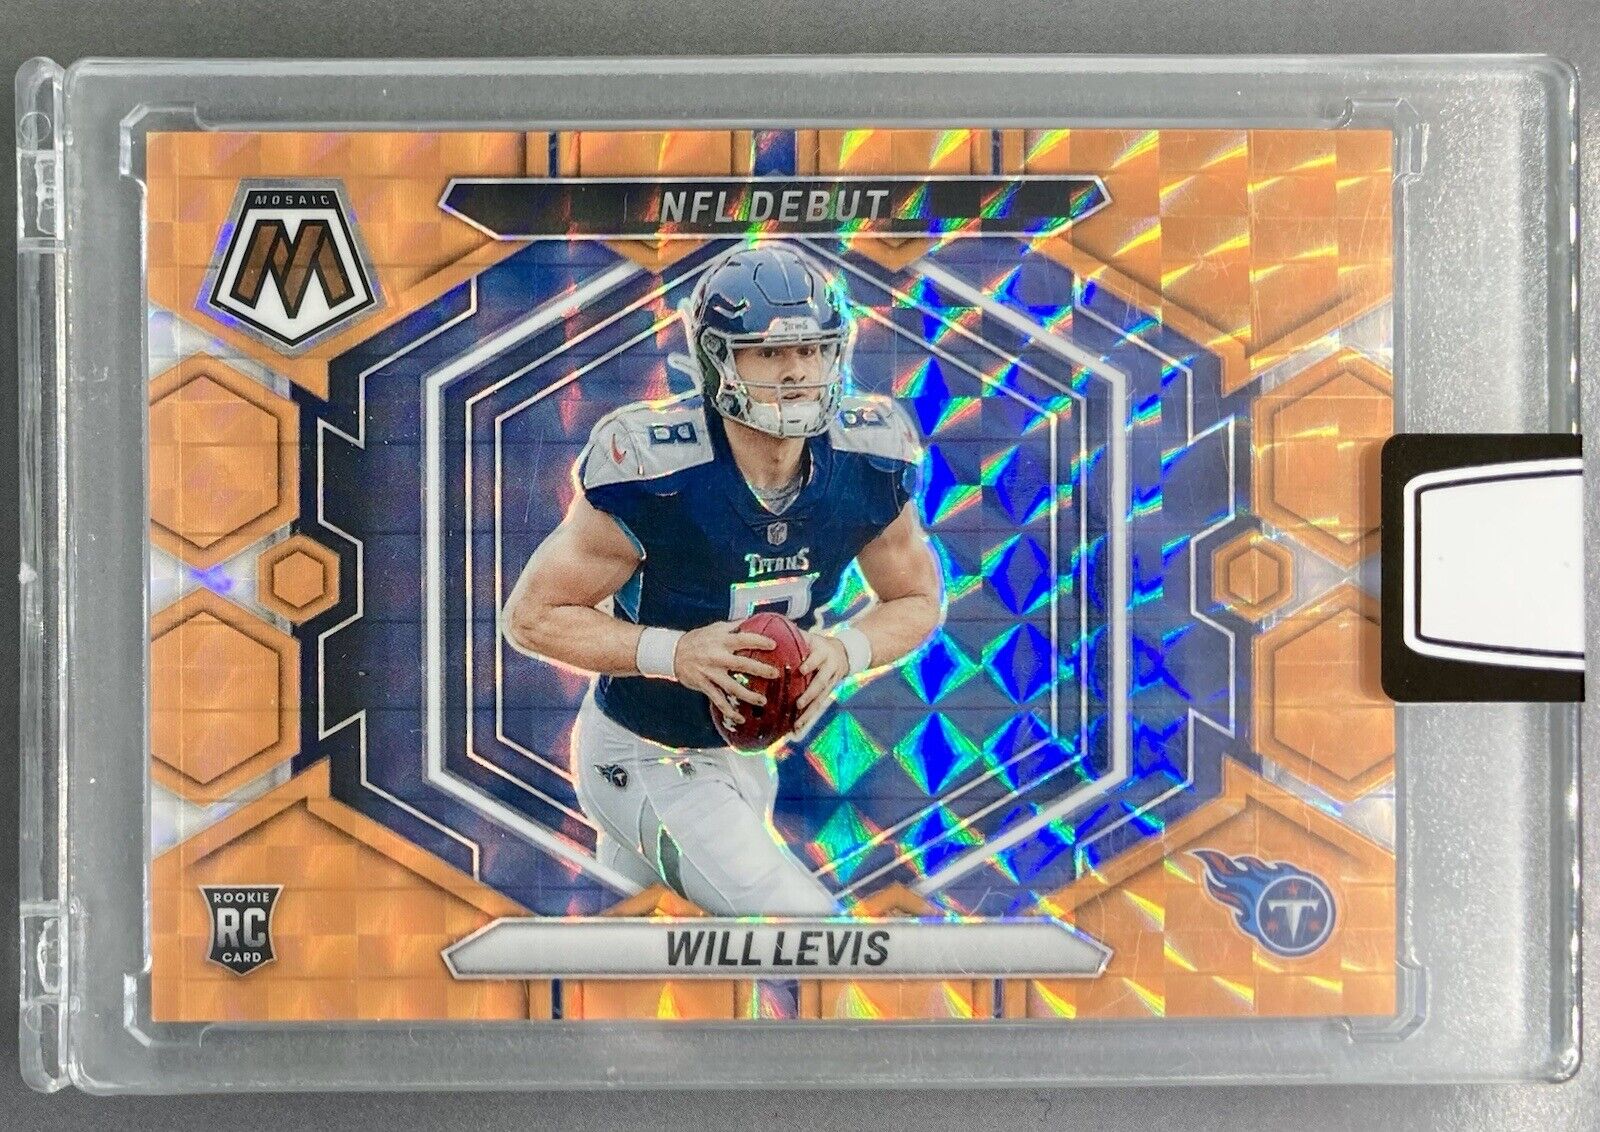 2023 Panini Mosaic WILL LEVIS NFL Debut Rookie RC Orange Parallel /199 MINT